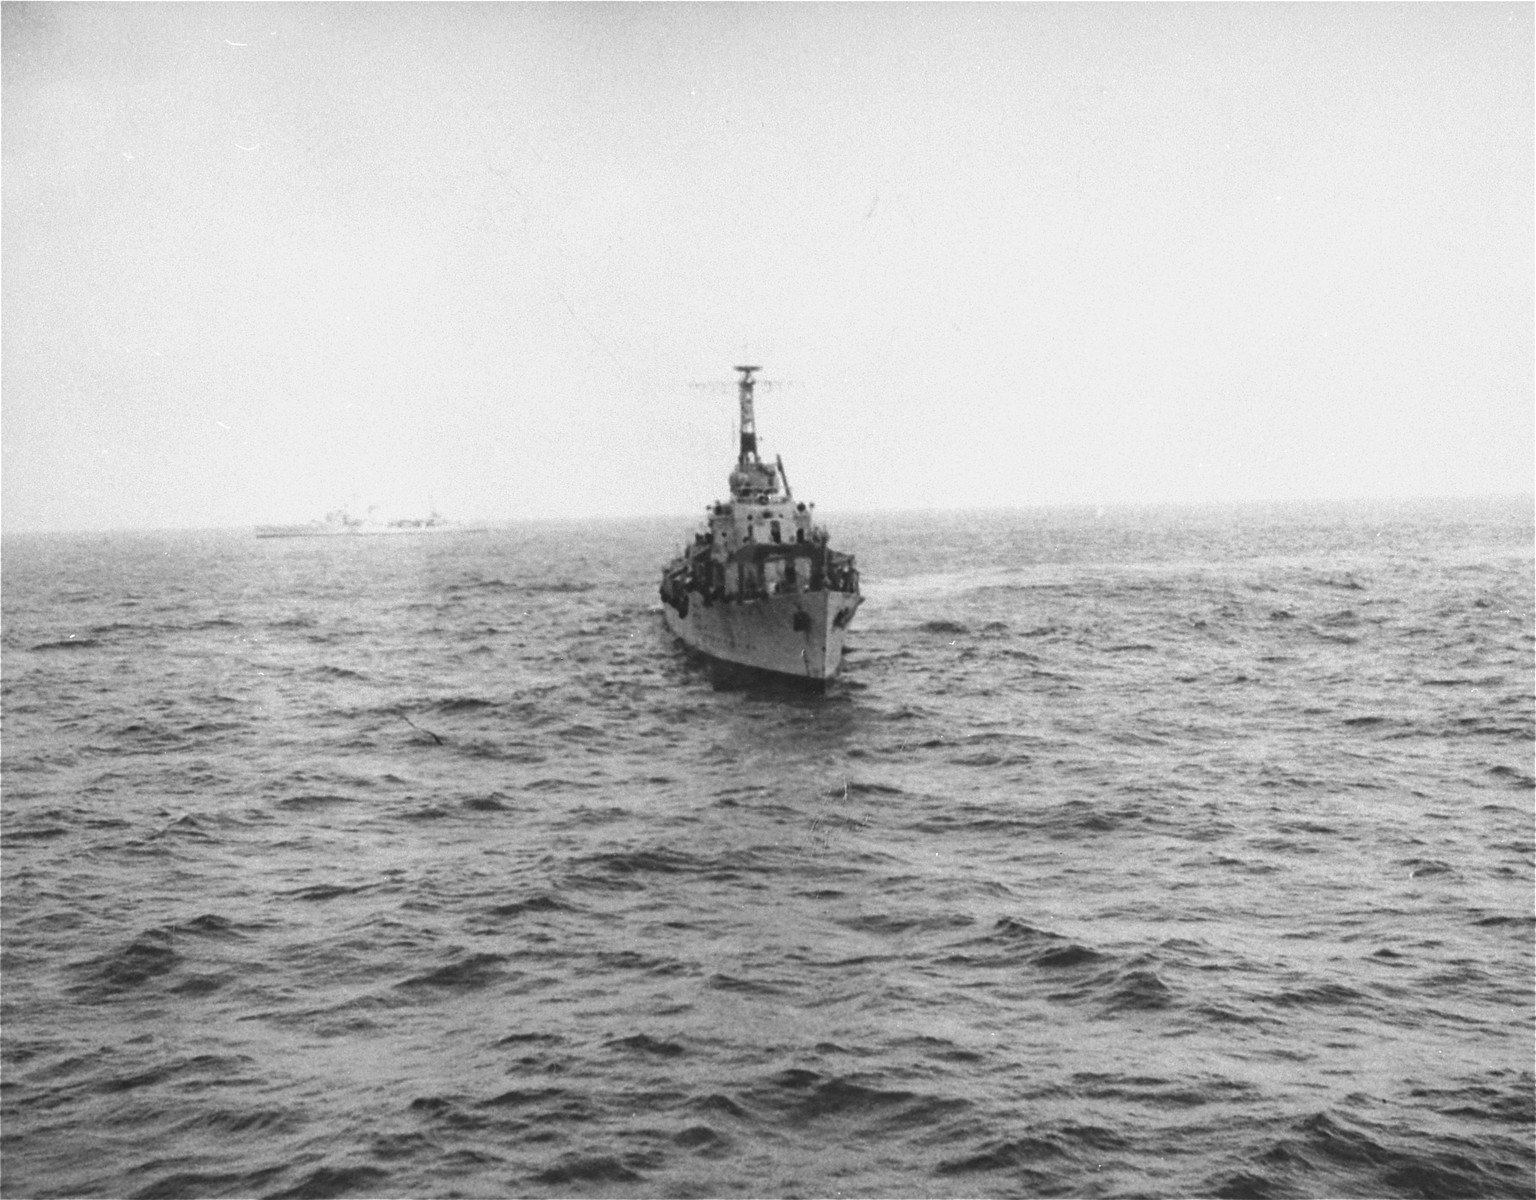 A British warship that has been dispatched to prevent the landing of the Exodus 1947, approaches the illegal immigrant ship off the coast of Palestine.